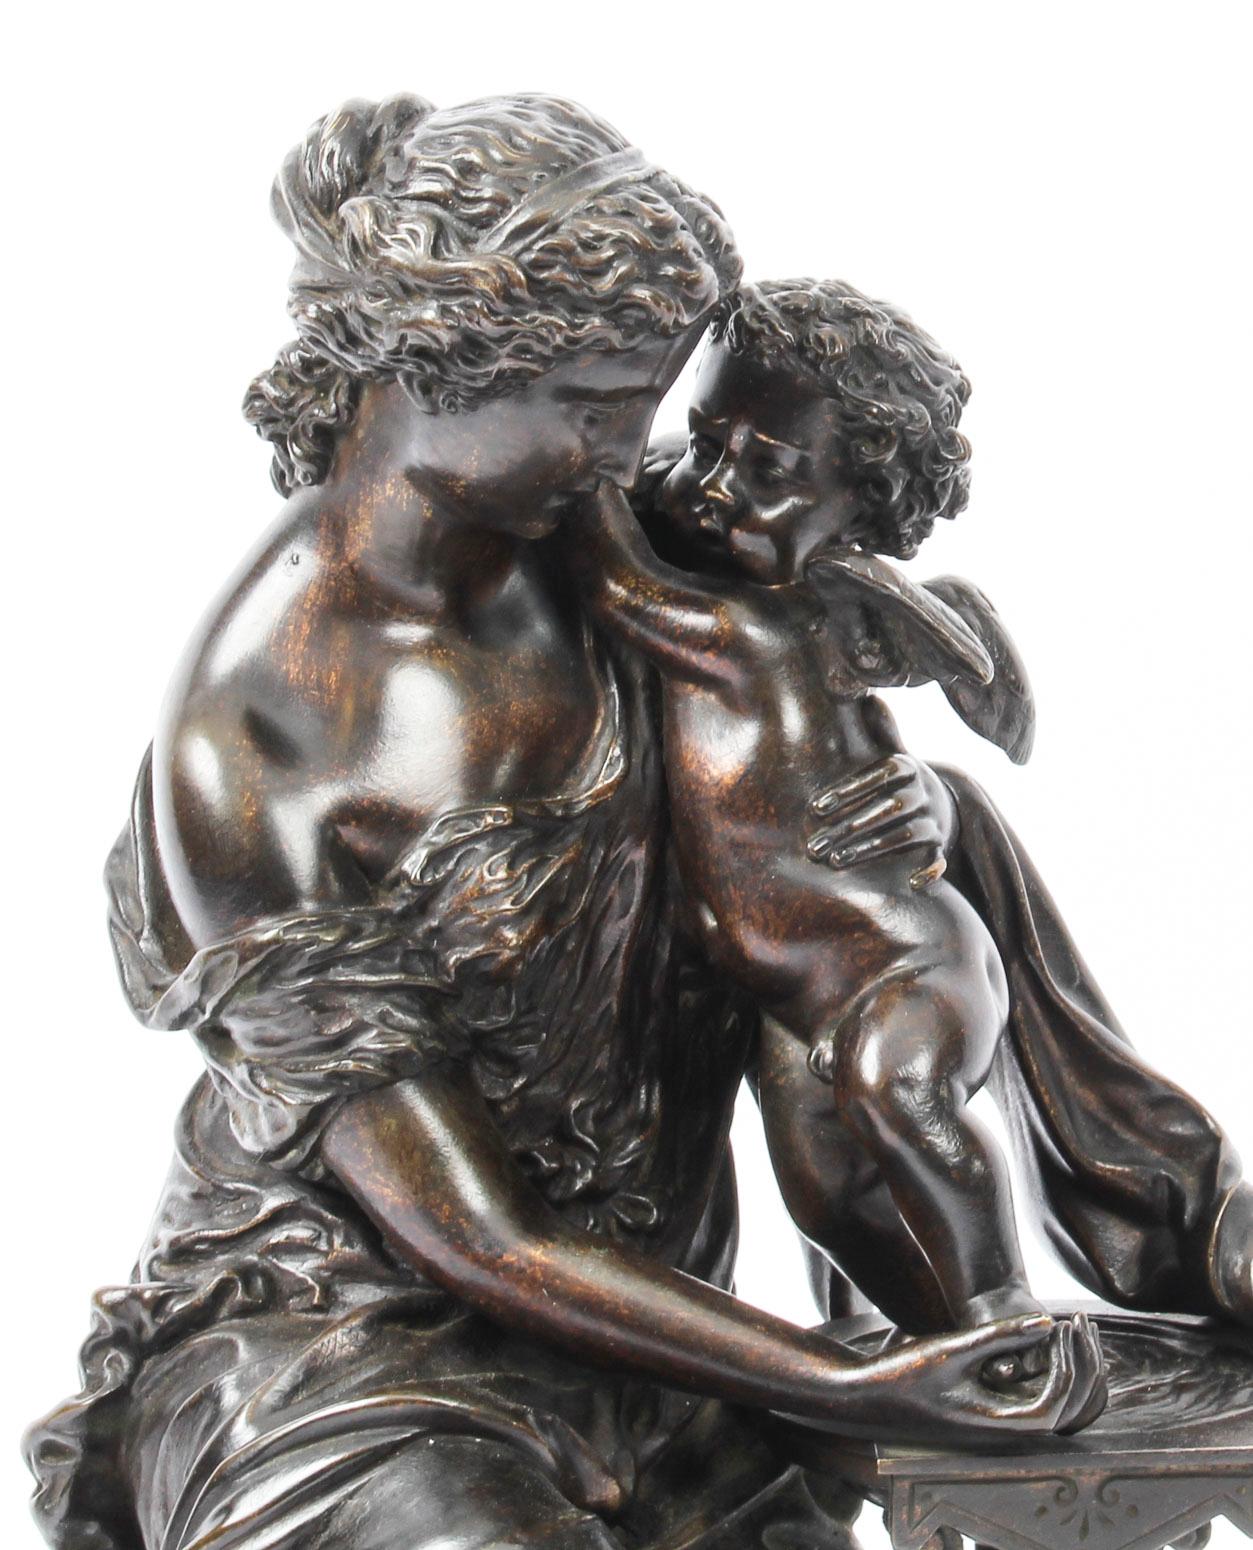 A superbly cast antique French bronze figure of a maiden and cherub by Emile Pierre Eugene Herbert (1828-1893) circa 1850 in date.
 
This dark brown patinated bronze features a seated maiden dressed in a classical flowing gown, bathing a winged